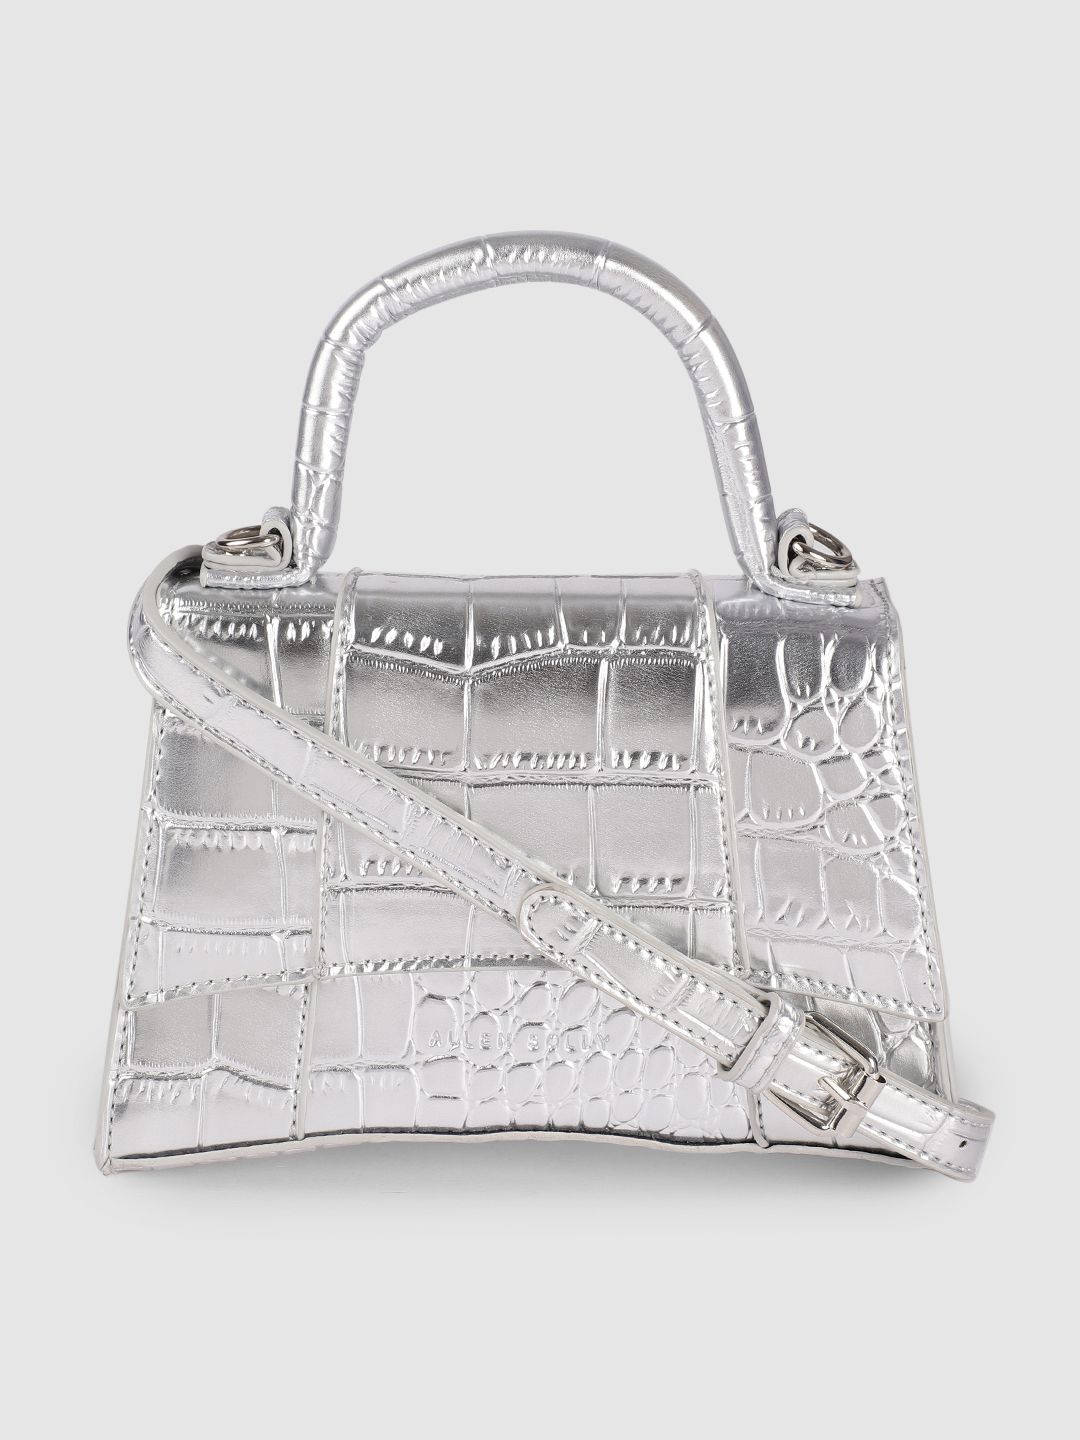 Allen Solly Silver-Toned Animal Textured Structured Satchel Price in India